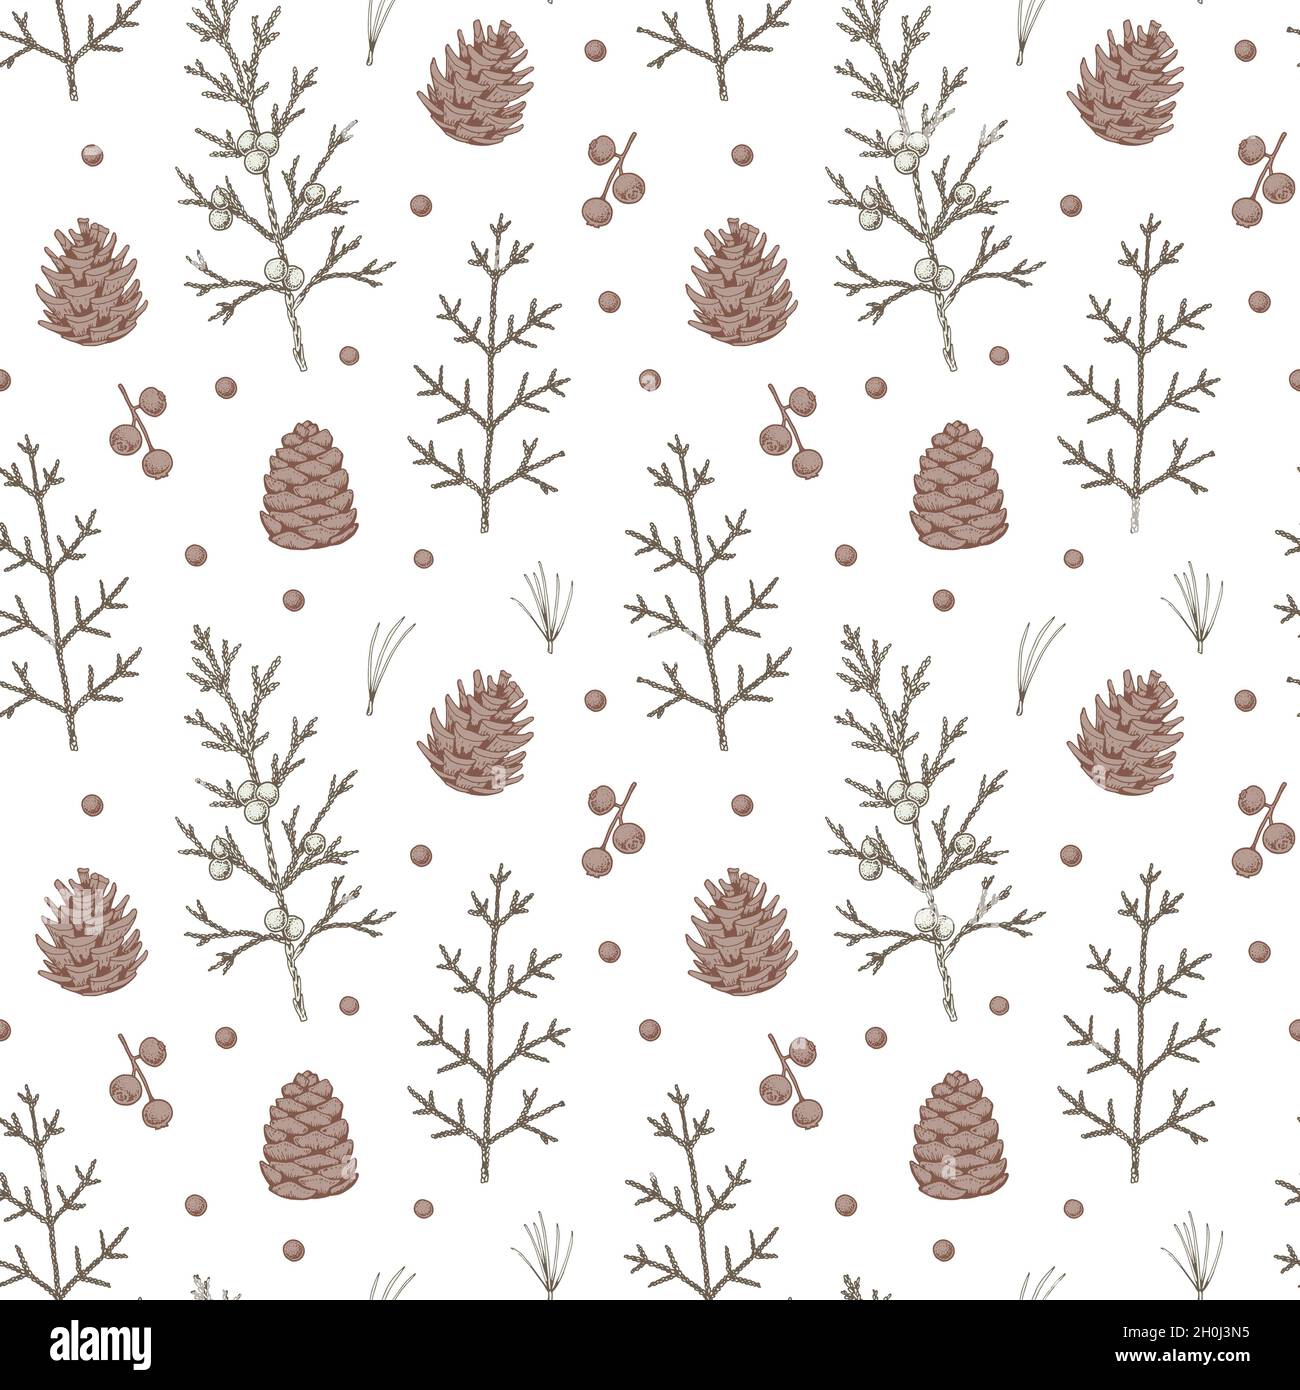 Christmas floral seamless patter with conifer cones and juniper branches. Hand drawn vector illustration Stock Vector